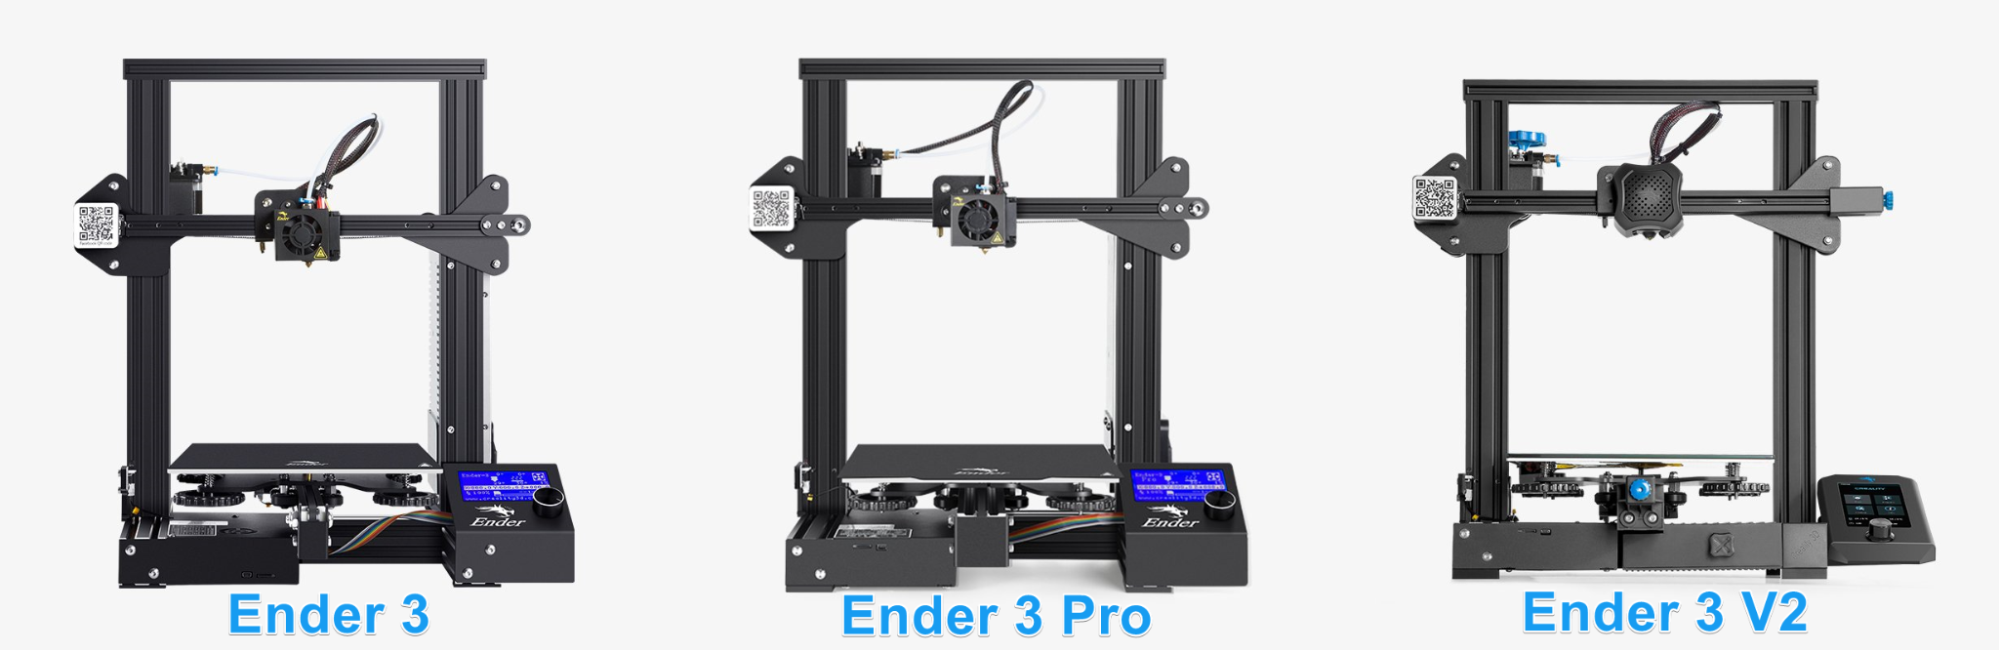 How to install an OFFICIAL Creality LED Light, on Ender 3 V2, Pro, and NEO  